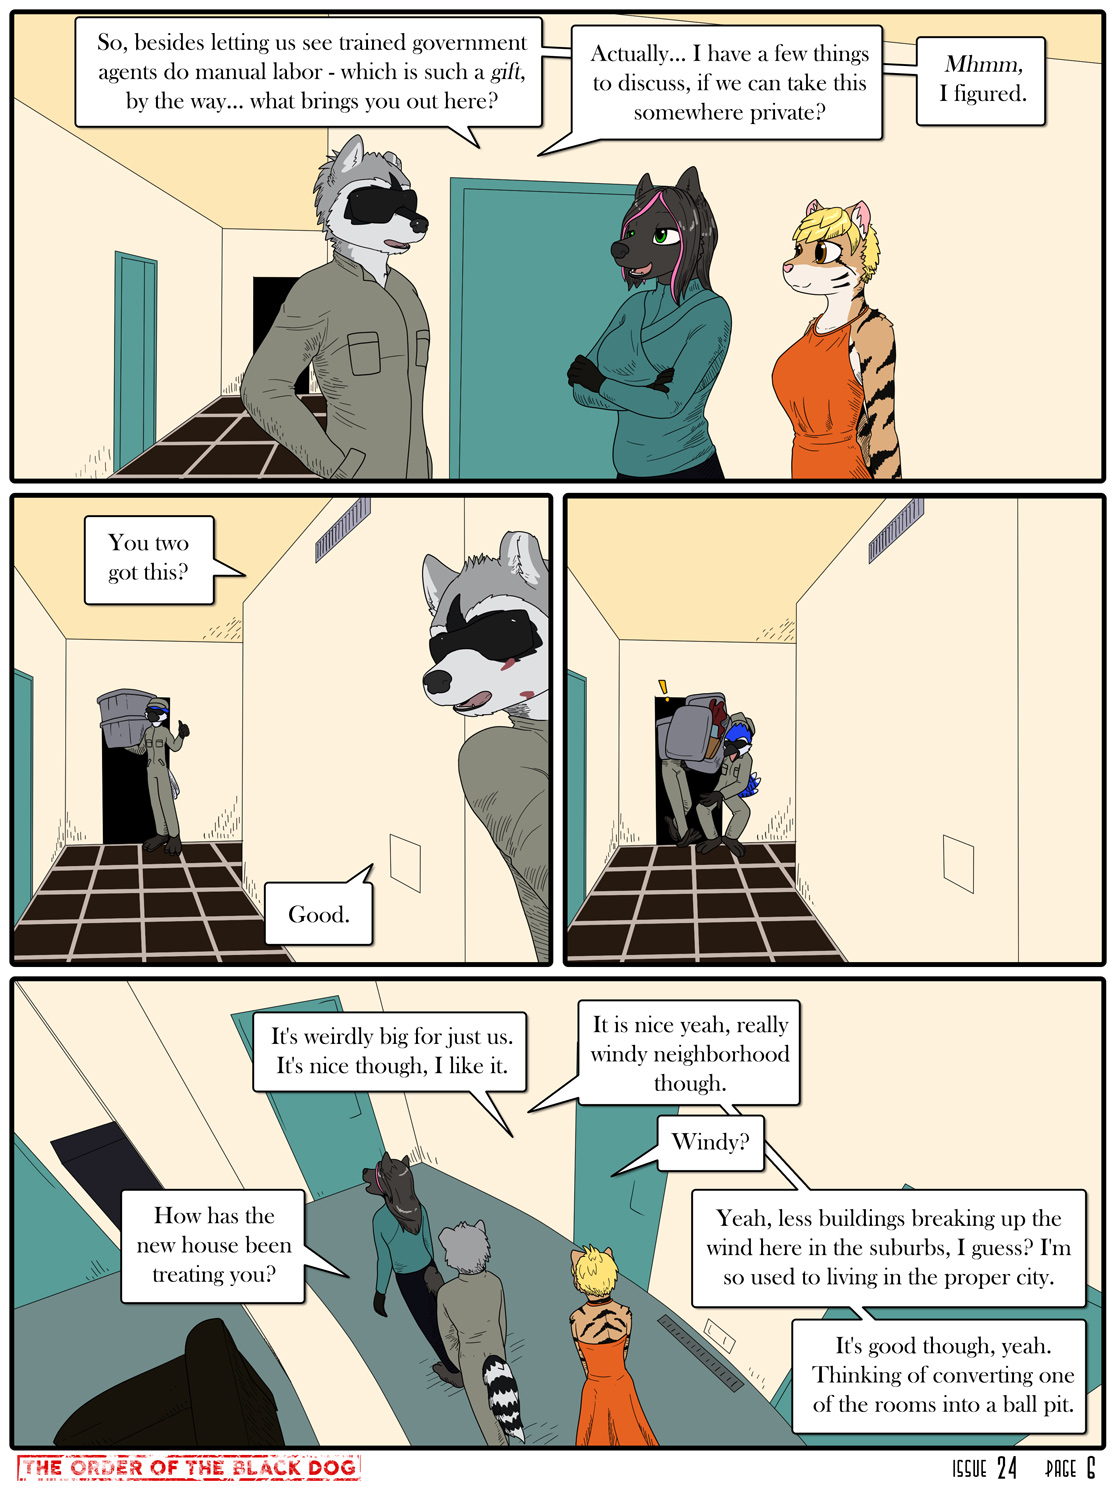 Issue 24, Page 6